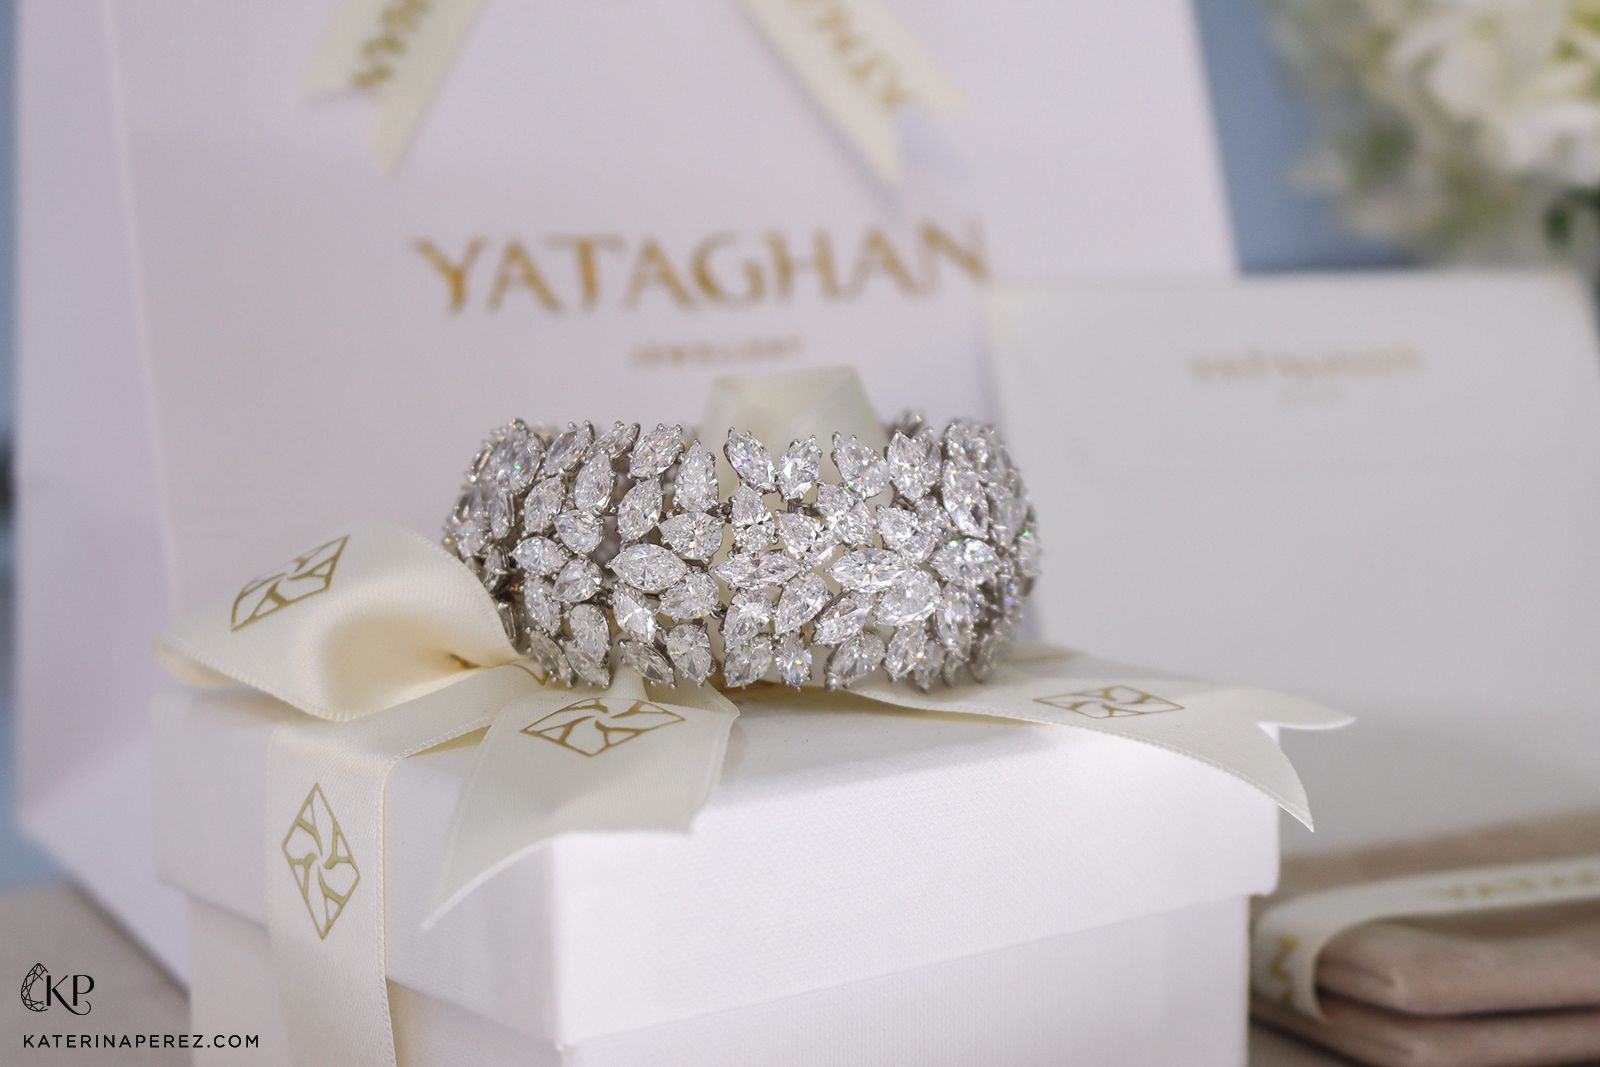 Marquise and pear-shaped diamond bracelet by Yataghan